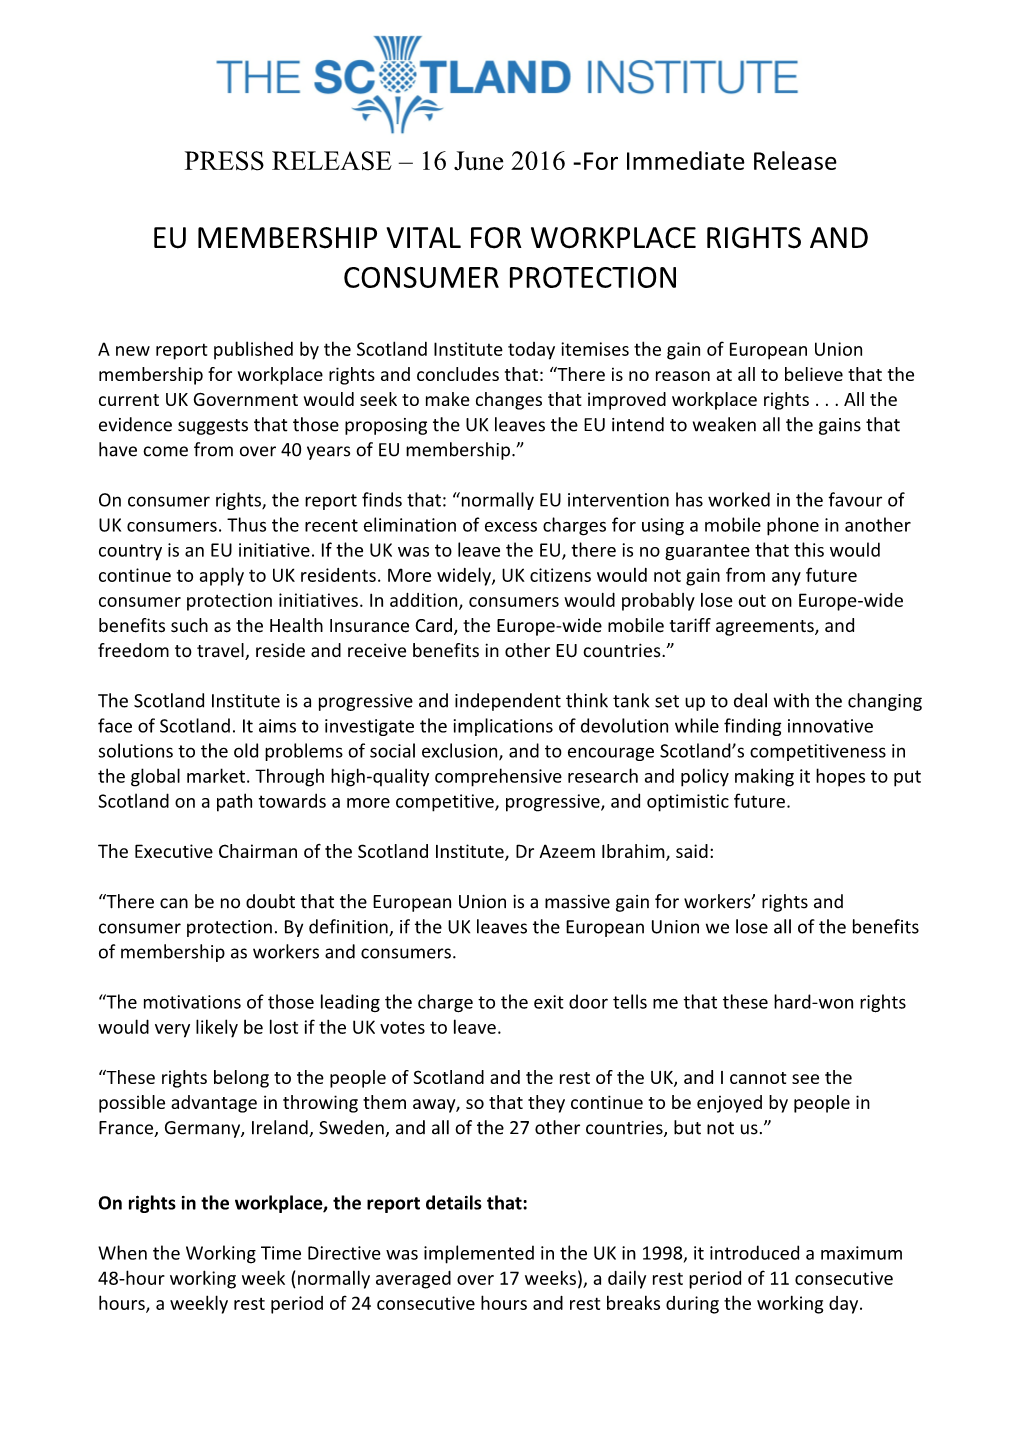 Eu Membership Vital for Workplace Rights and Consumer Protection